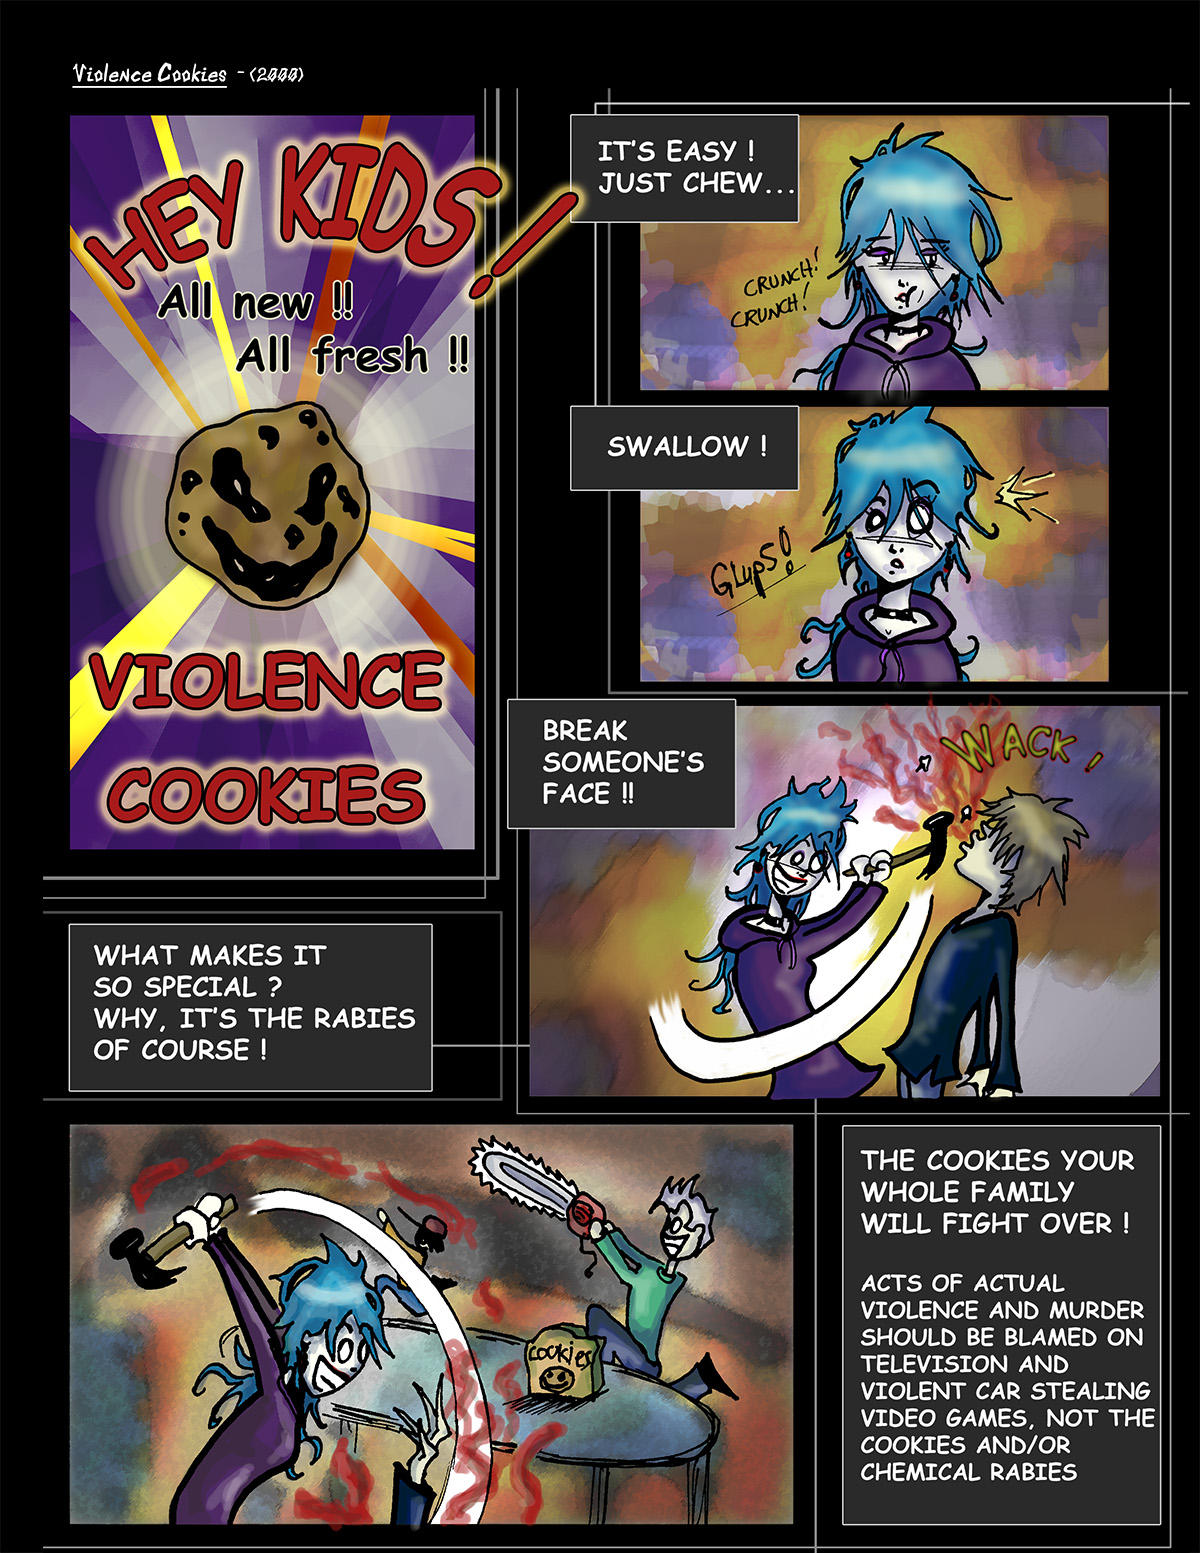 nameless_page20(violencecookies)